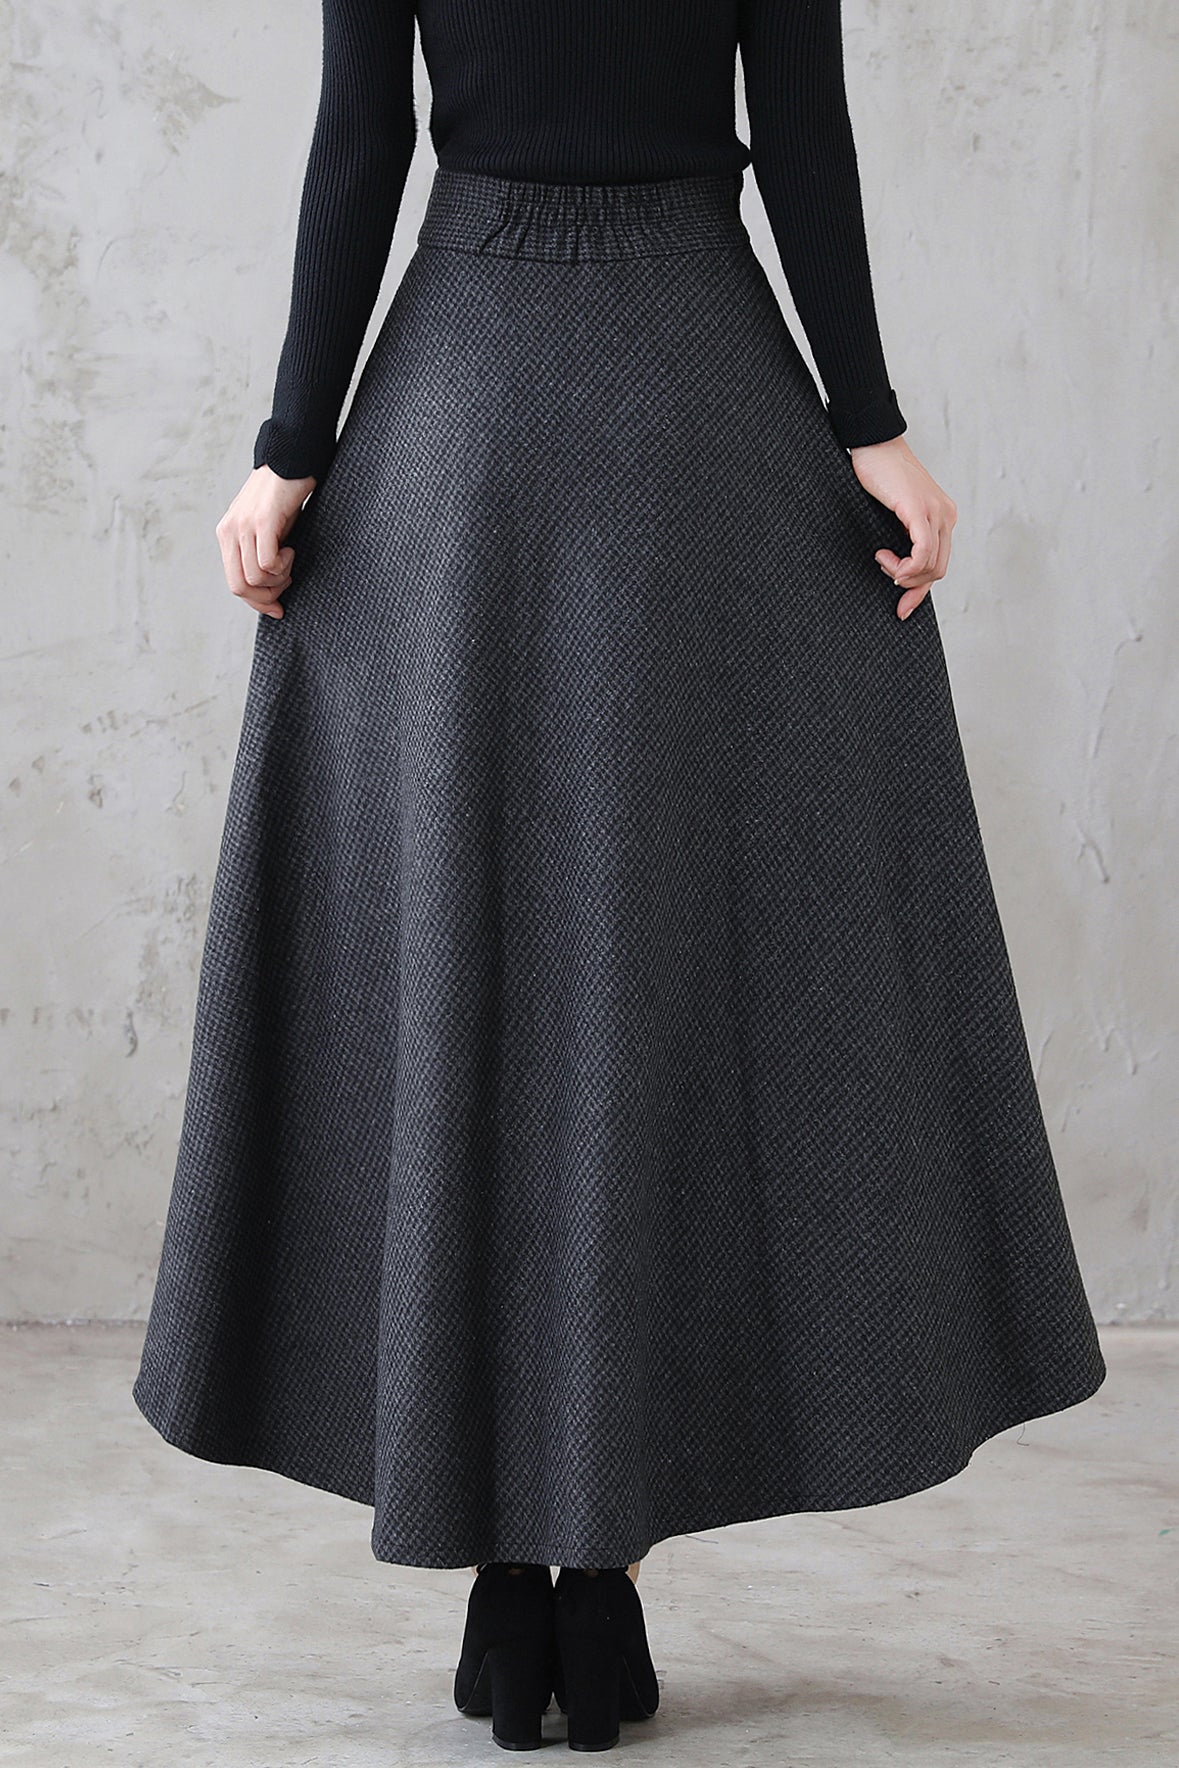 Vintage Inspired Thick Long Maxi Plaid Wool Skirt 3120